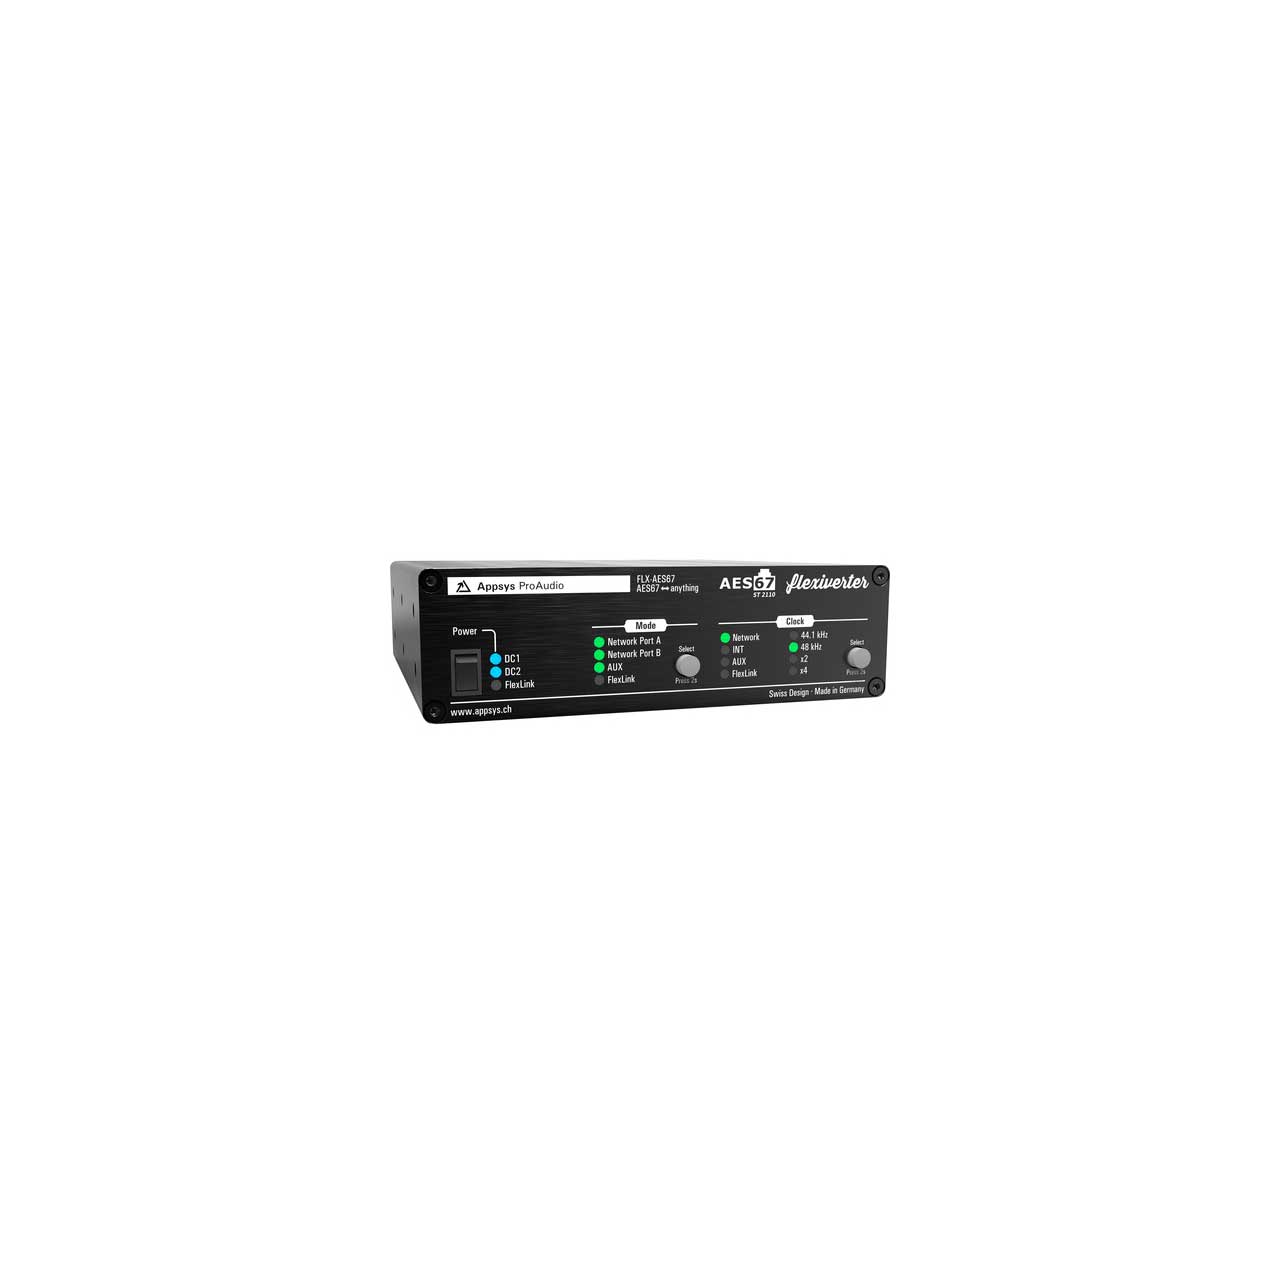 Appsys Pro Audio Flexiverter AES67 64 x 64 Channel Format Converter for AES67 FLX-AES67